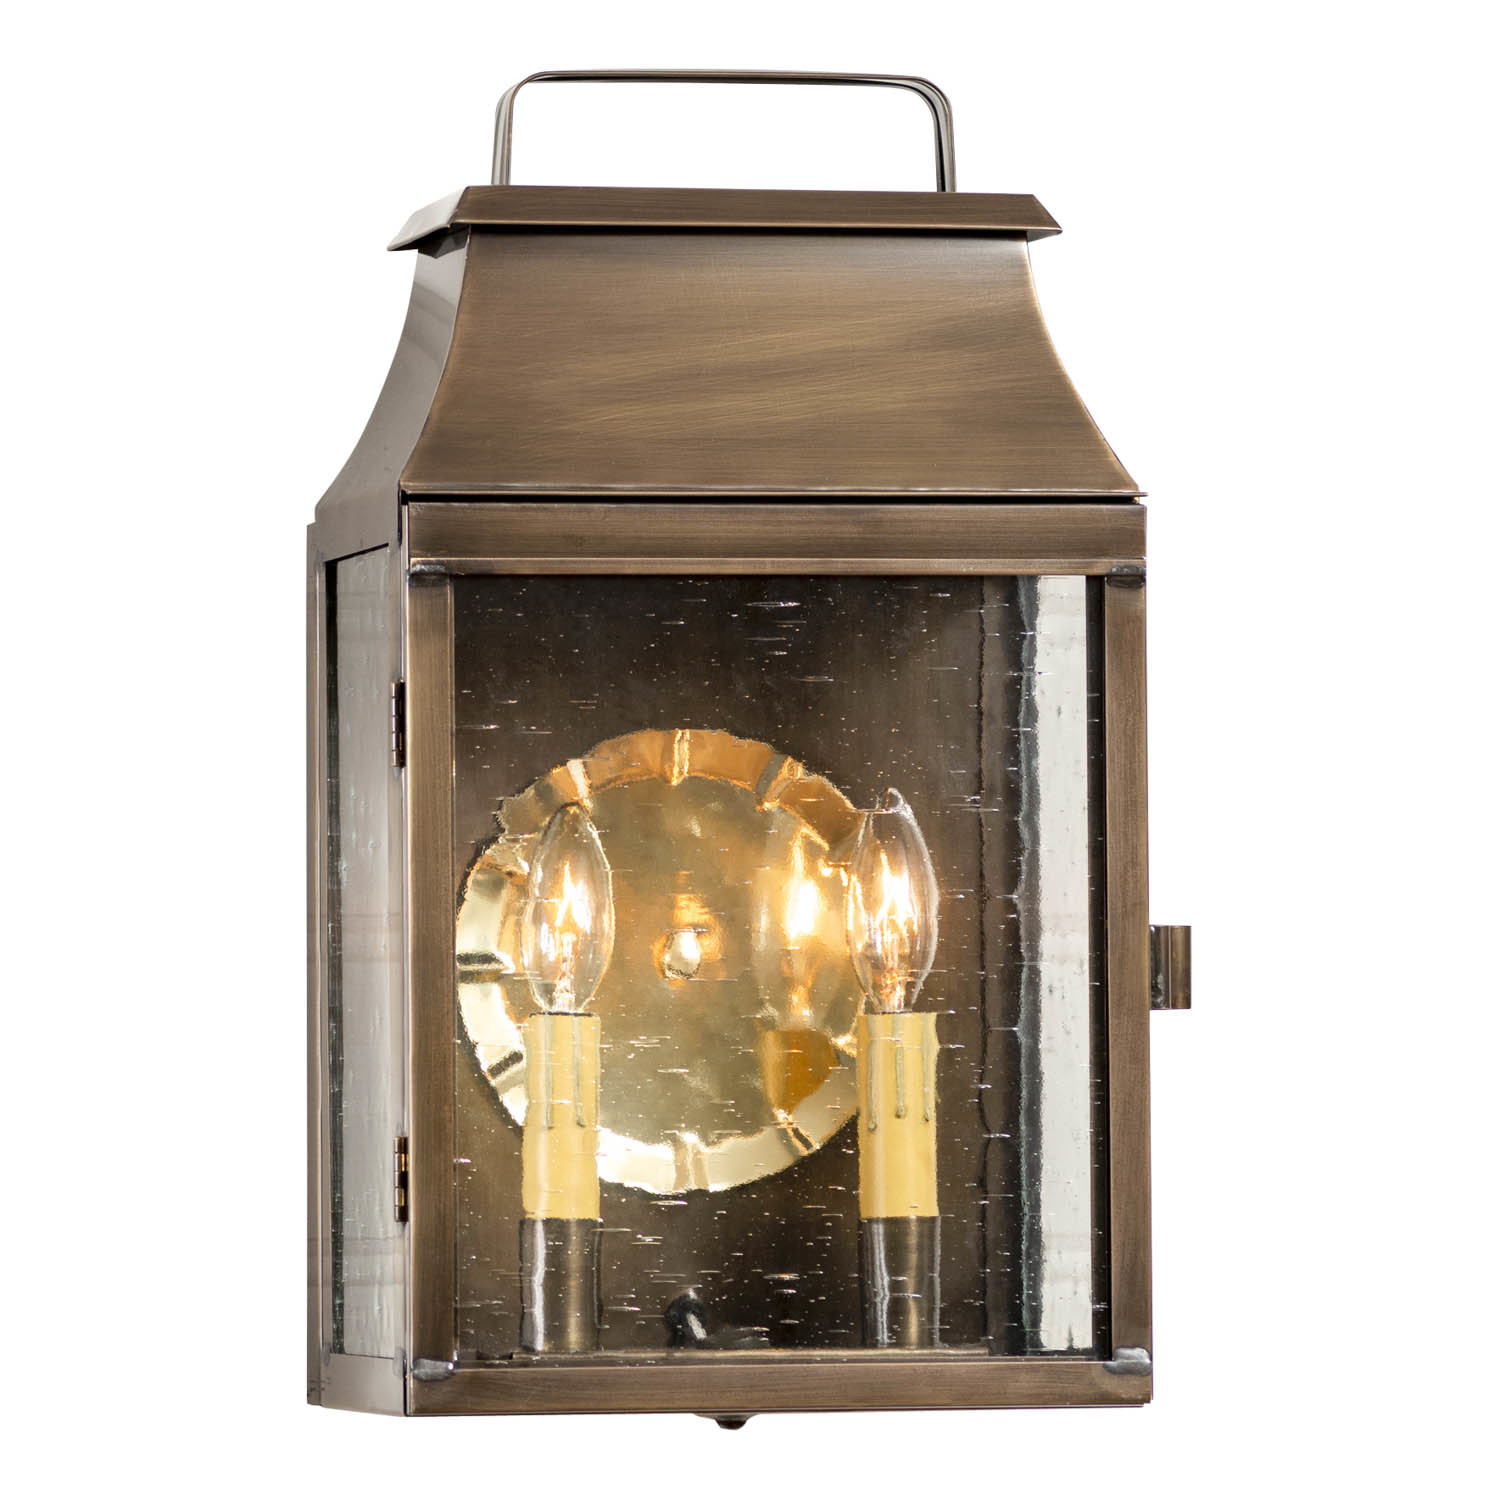 Irvins Country Tinware Valley Forge Outdoor Wall Light in Solid Weathered Brass - $356.35